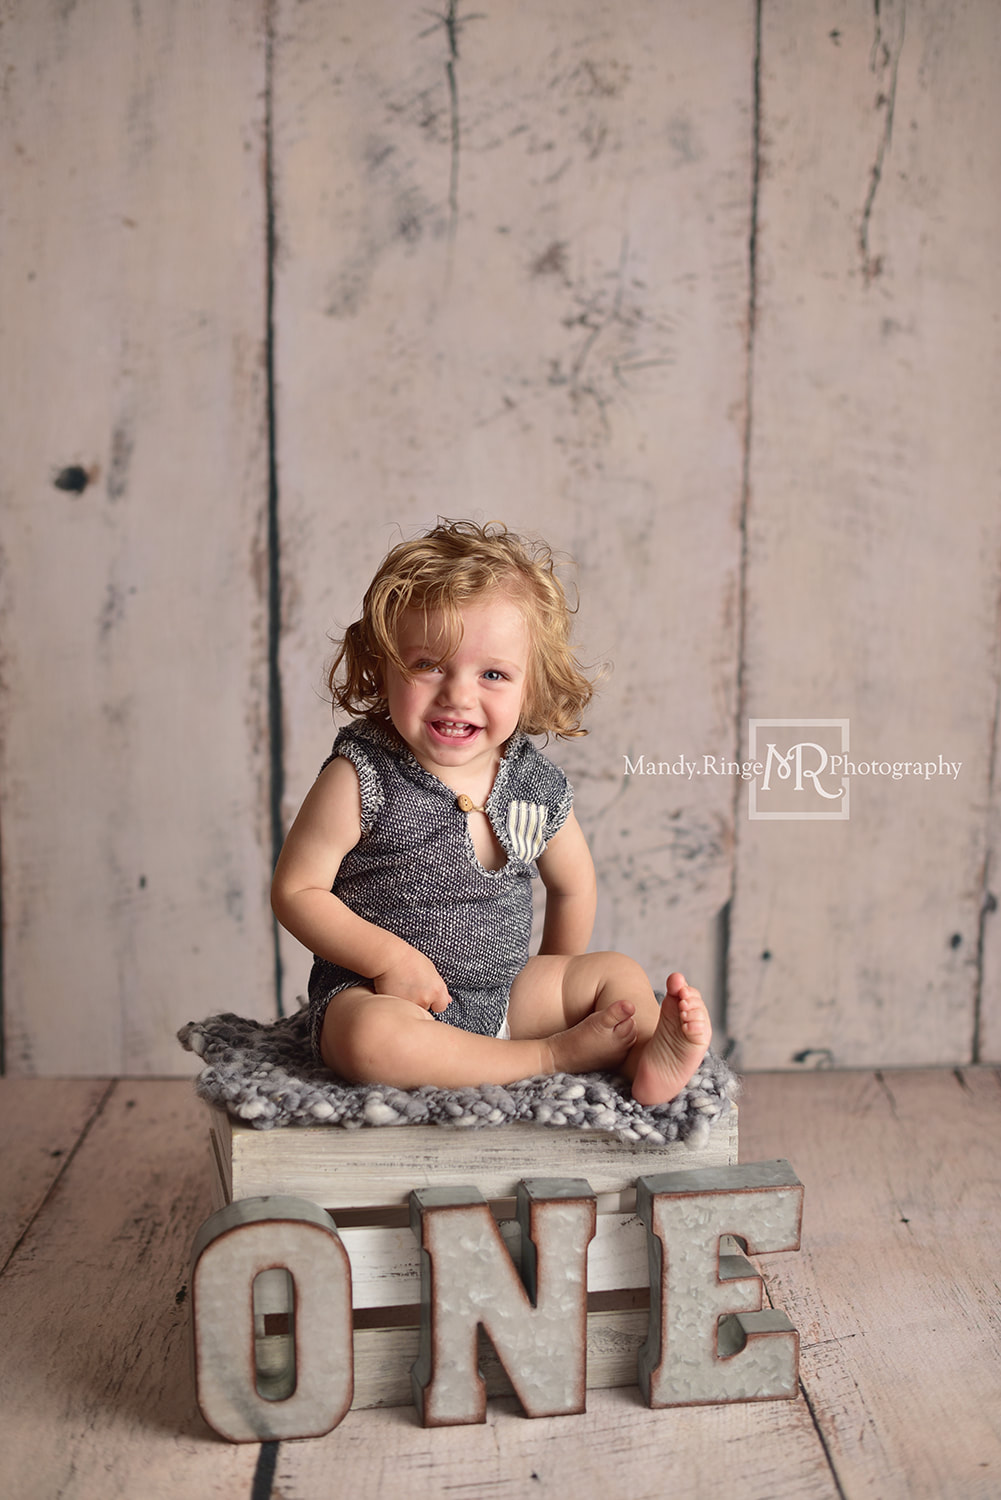 Milestone Session // Girl sitter session, 6 to 12 months, outfit from Sew Darn Cute, Backdrop from Intuitions Backdrops // St. Charles, IL studio // Mandy Ringe Photography